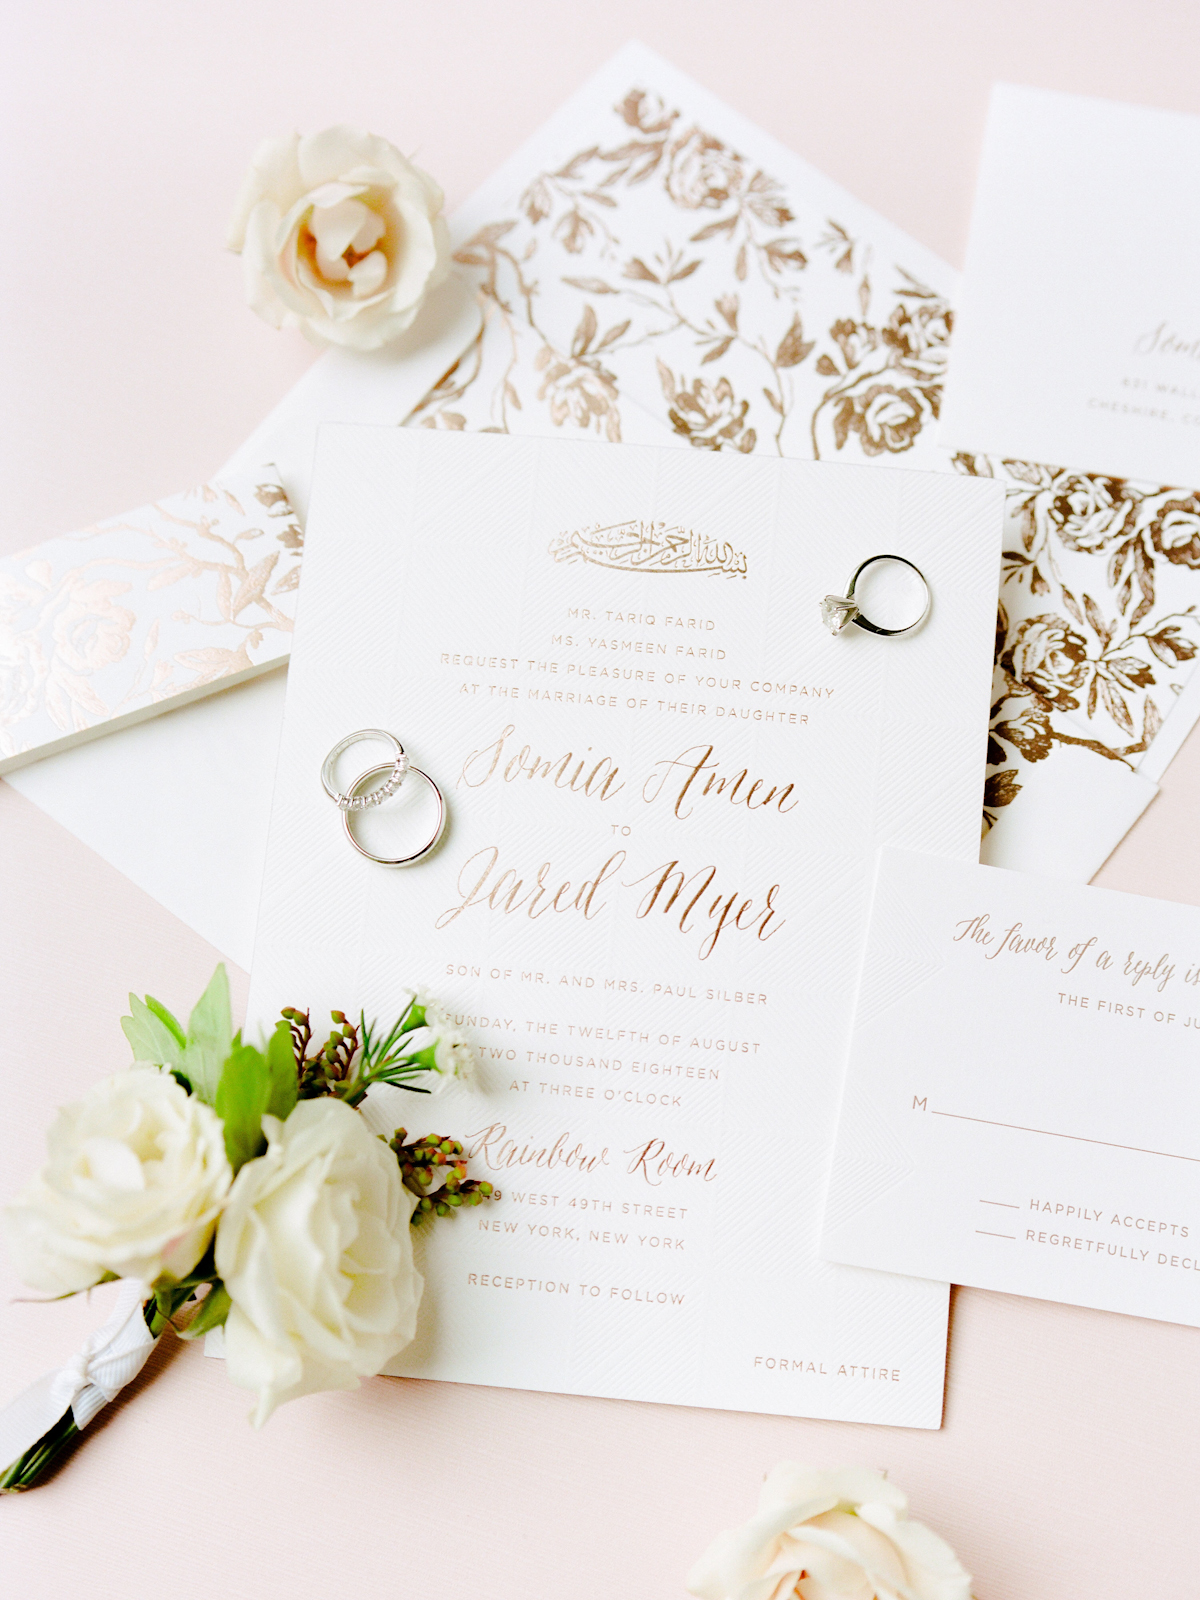 Invitation suite with floral envelope liner for Rainbow Room wedding